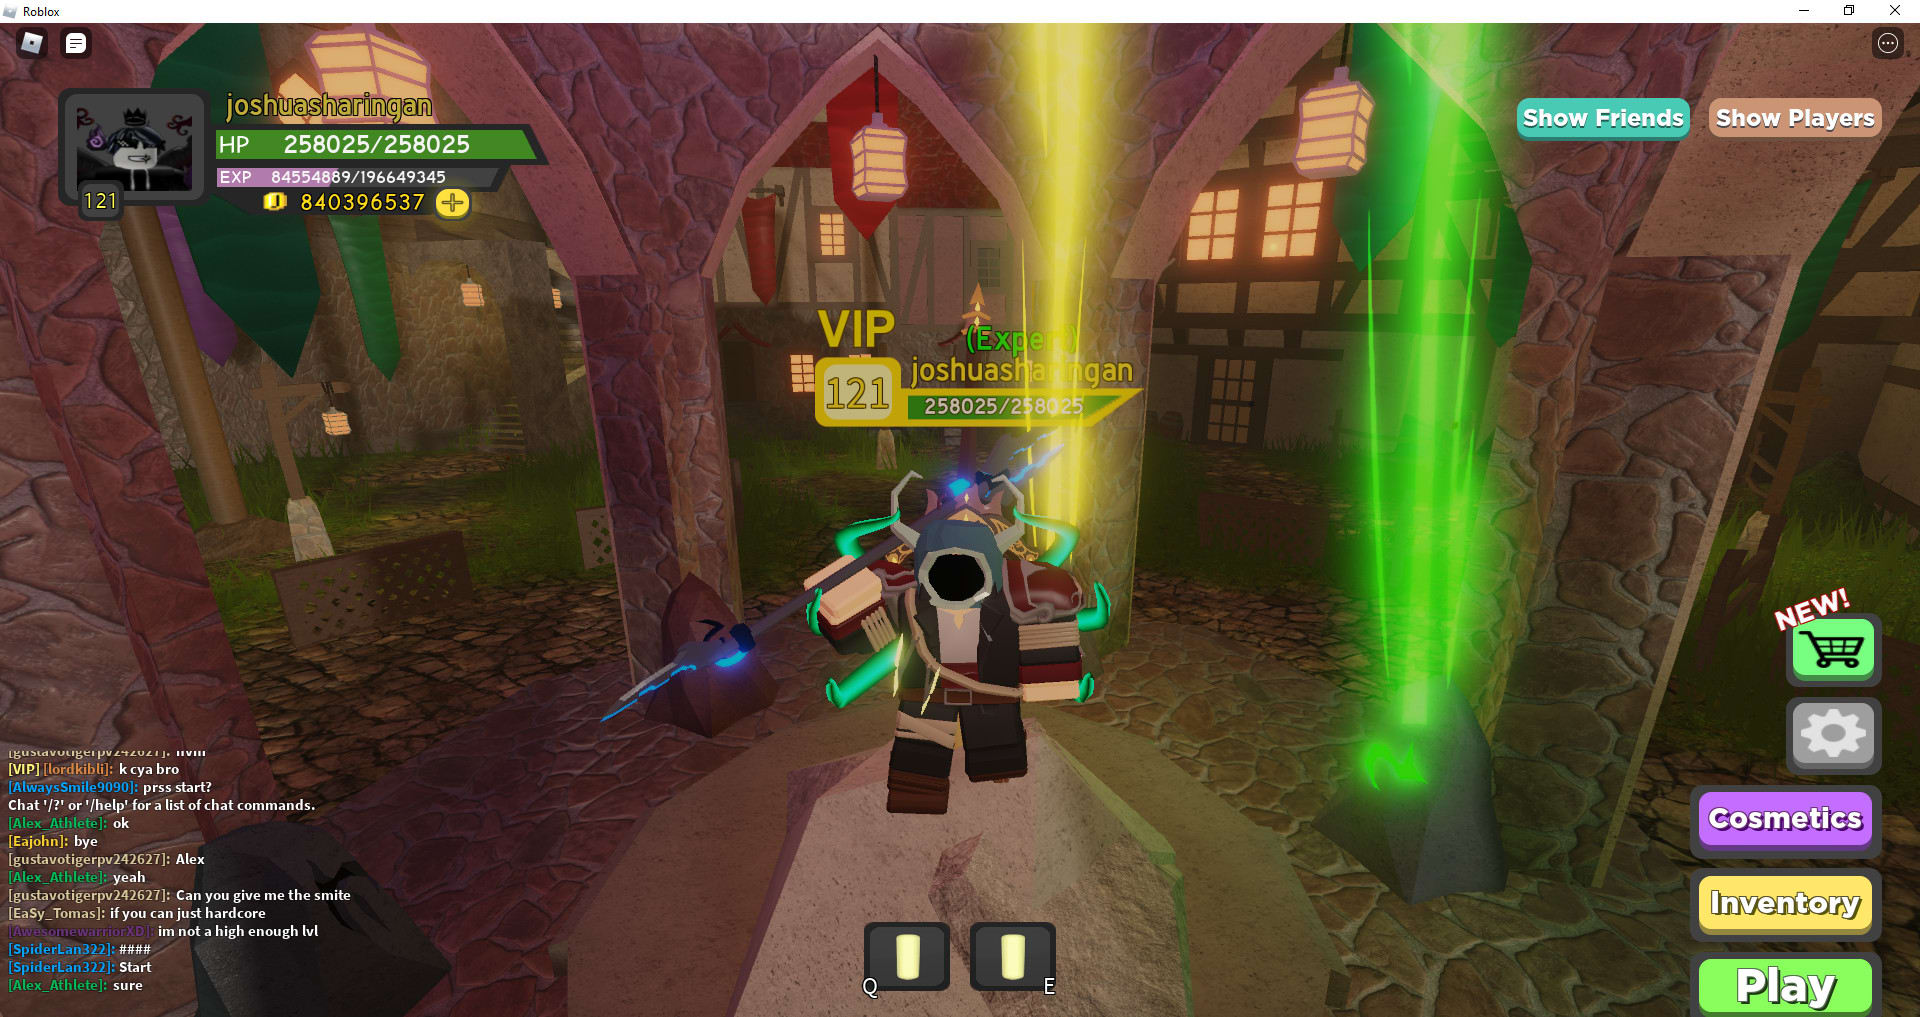 Carry In Dungeon Quest 145 Bellow By Joshuadragon173 Fiverr - how much exp dungeons give roblox dungeo nquest